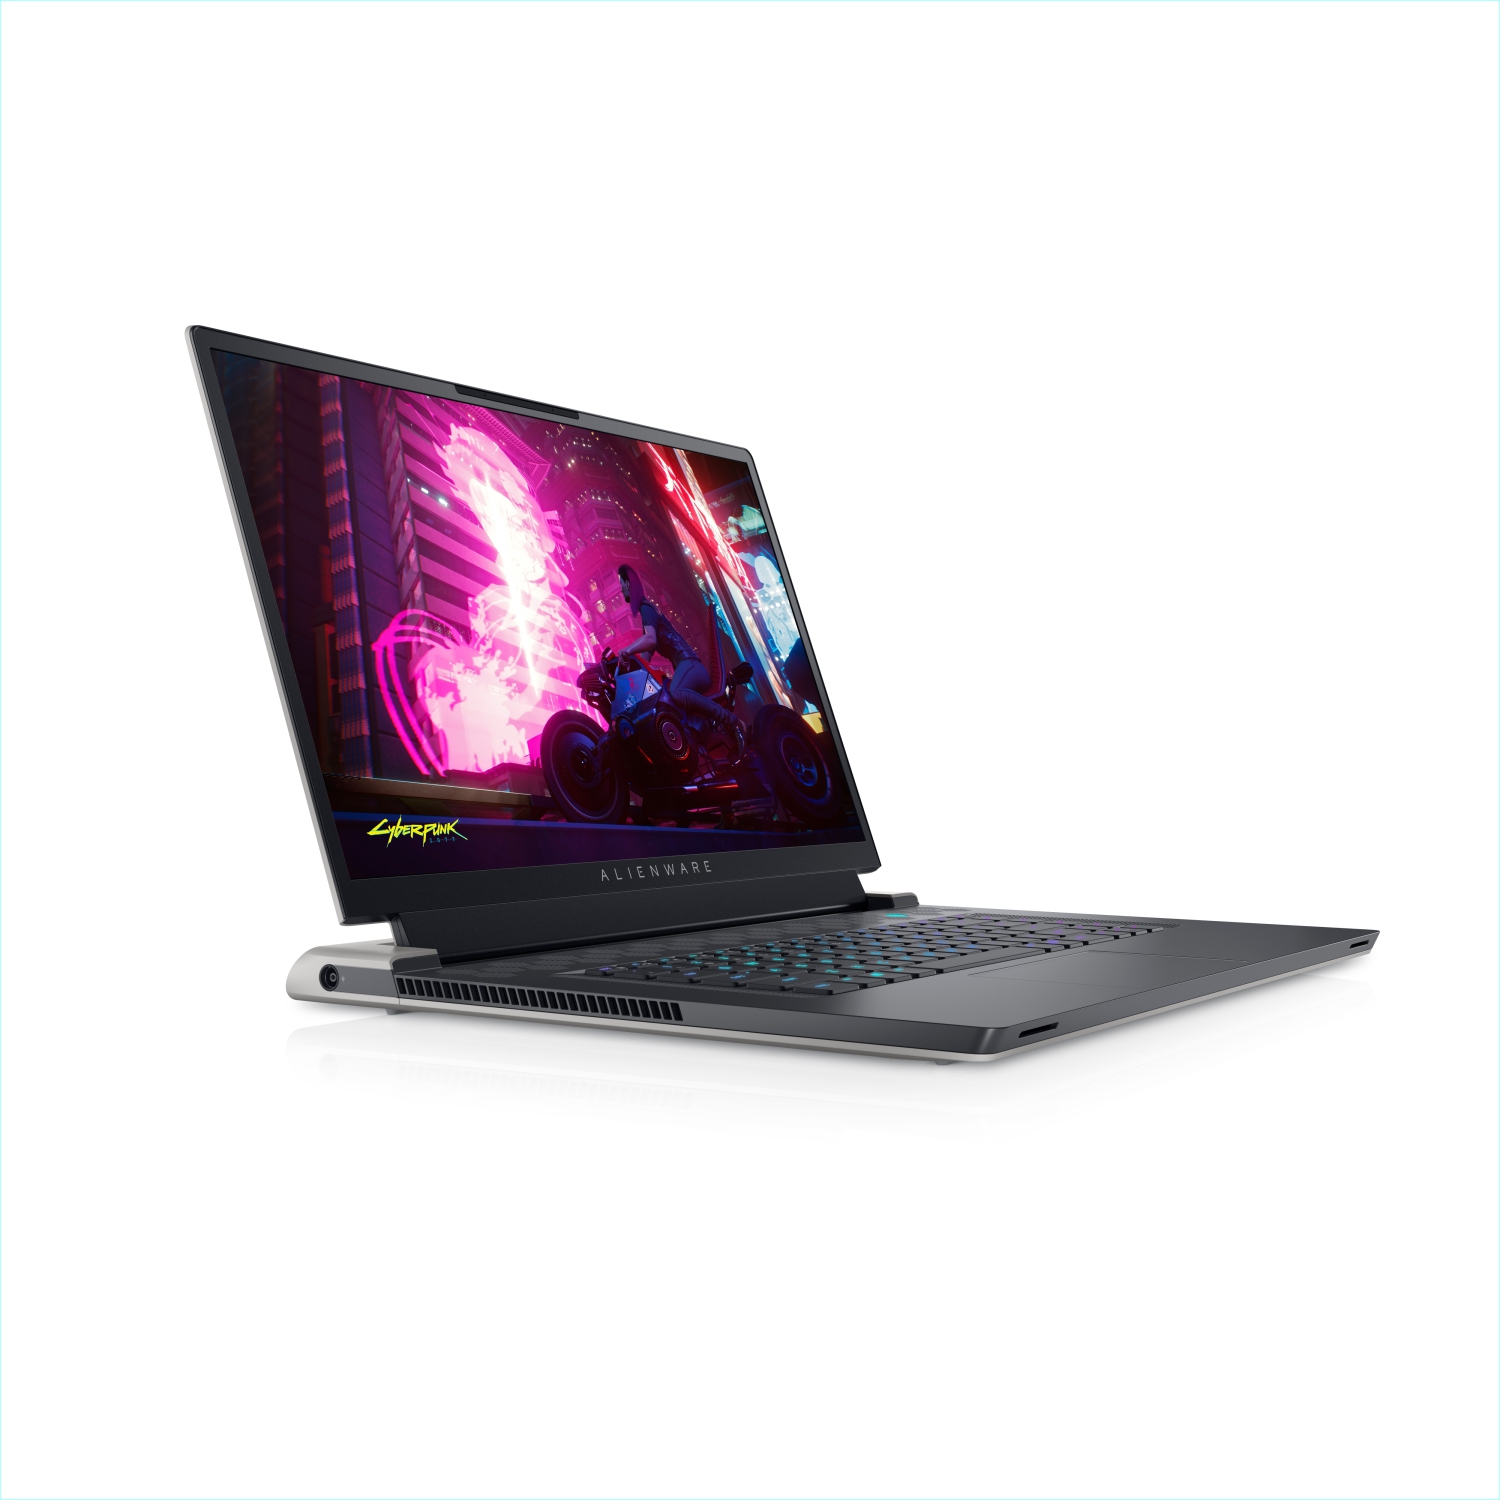 Refurbished (Excellent) – Dell Alienware X17 R1 Gaming Laptop (2021) | 17.3" FHD | Core i7 - 1TB SSD - 32GB RAM - RTX 3080 | 8 Cores @ 4.6 GHz - 11th Gen CPU - 8GB GDDR6X